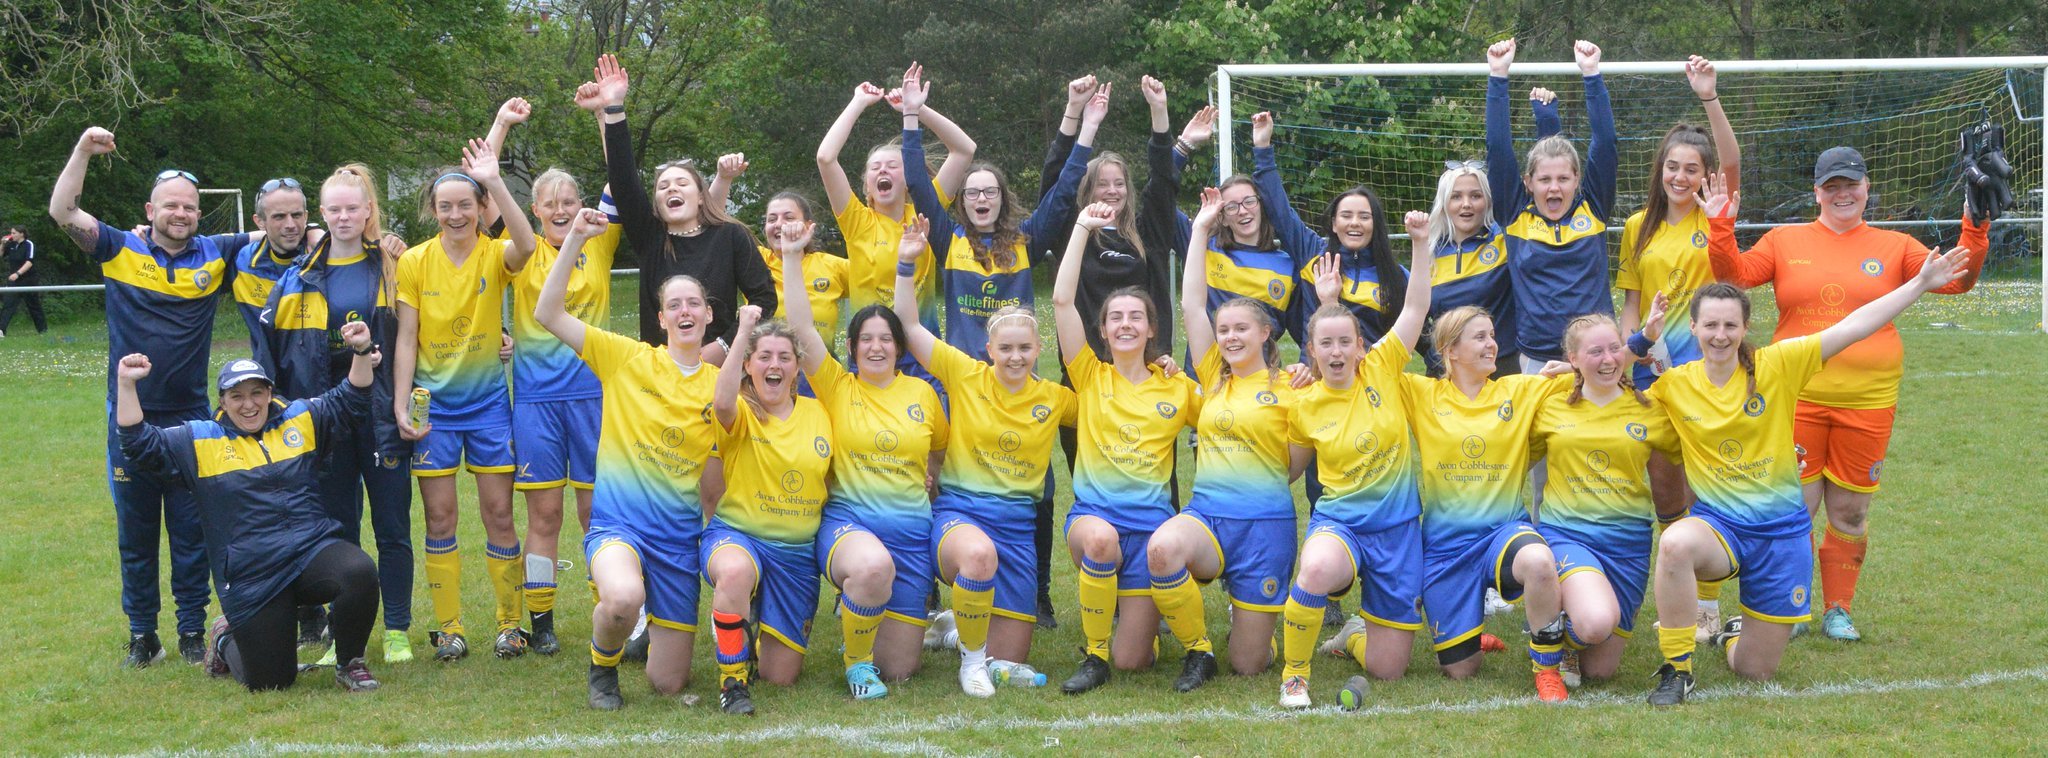 Olveston United Ladies celebrate clinching the league title following a 2-0 win over Longlevens Ladies. Photo: Soccerworld